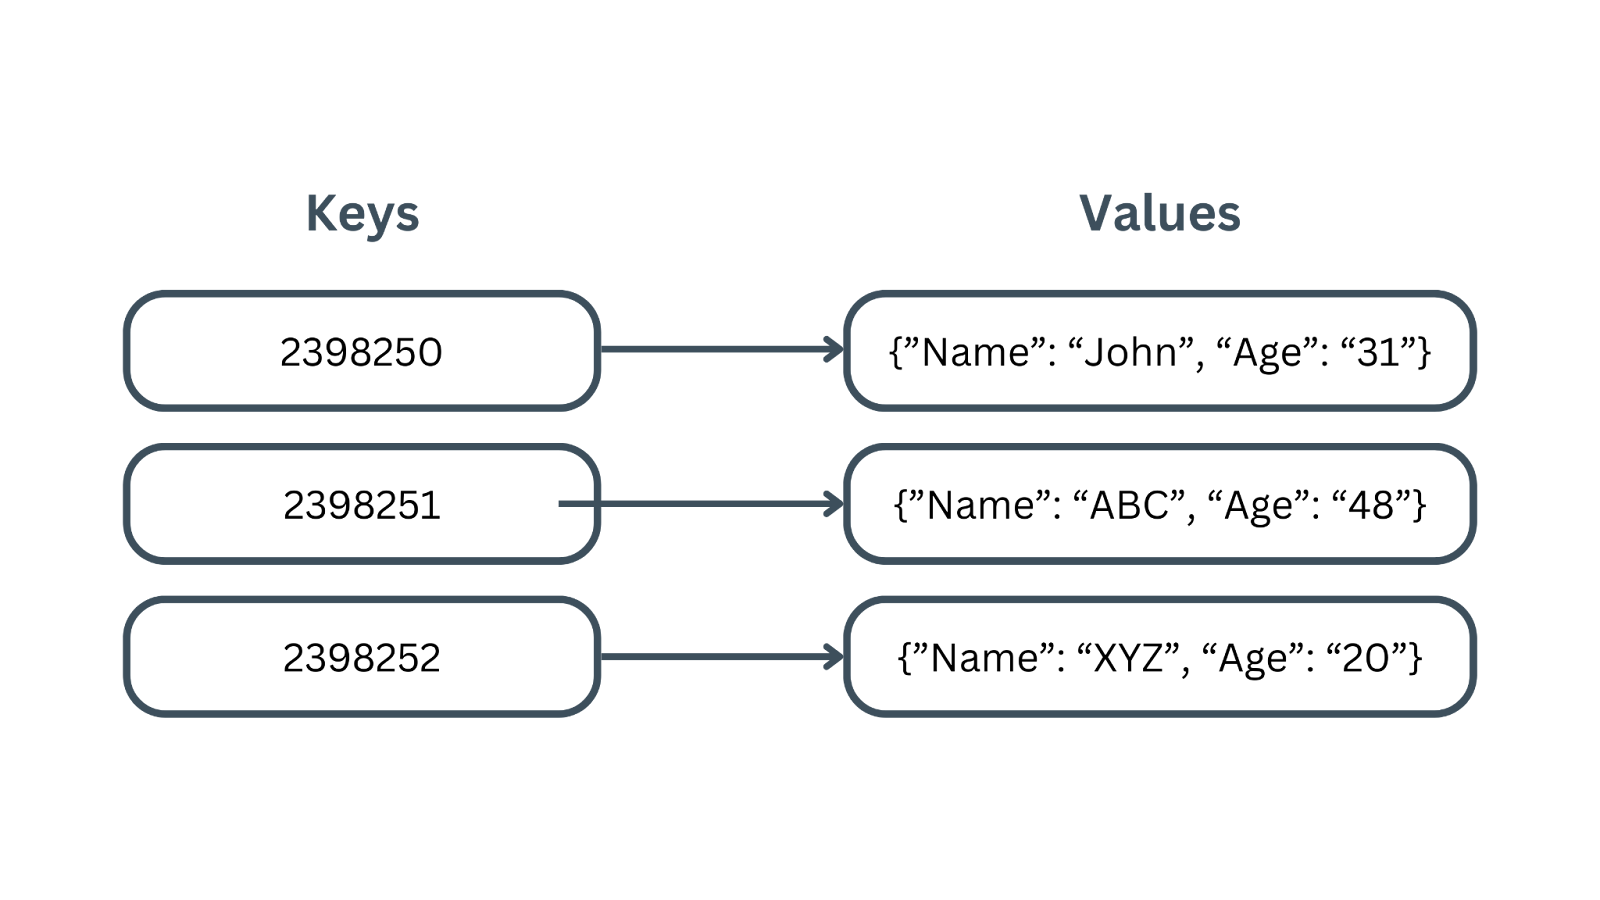 NoSQL databases function on Key-Value stores